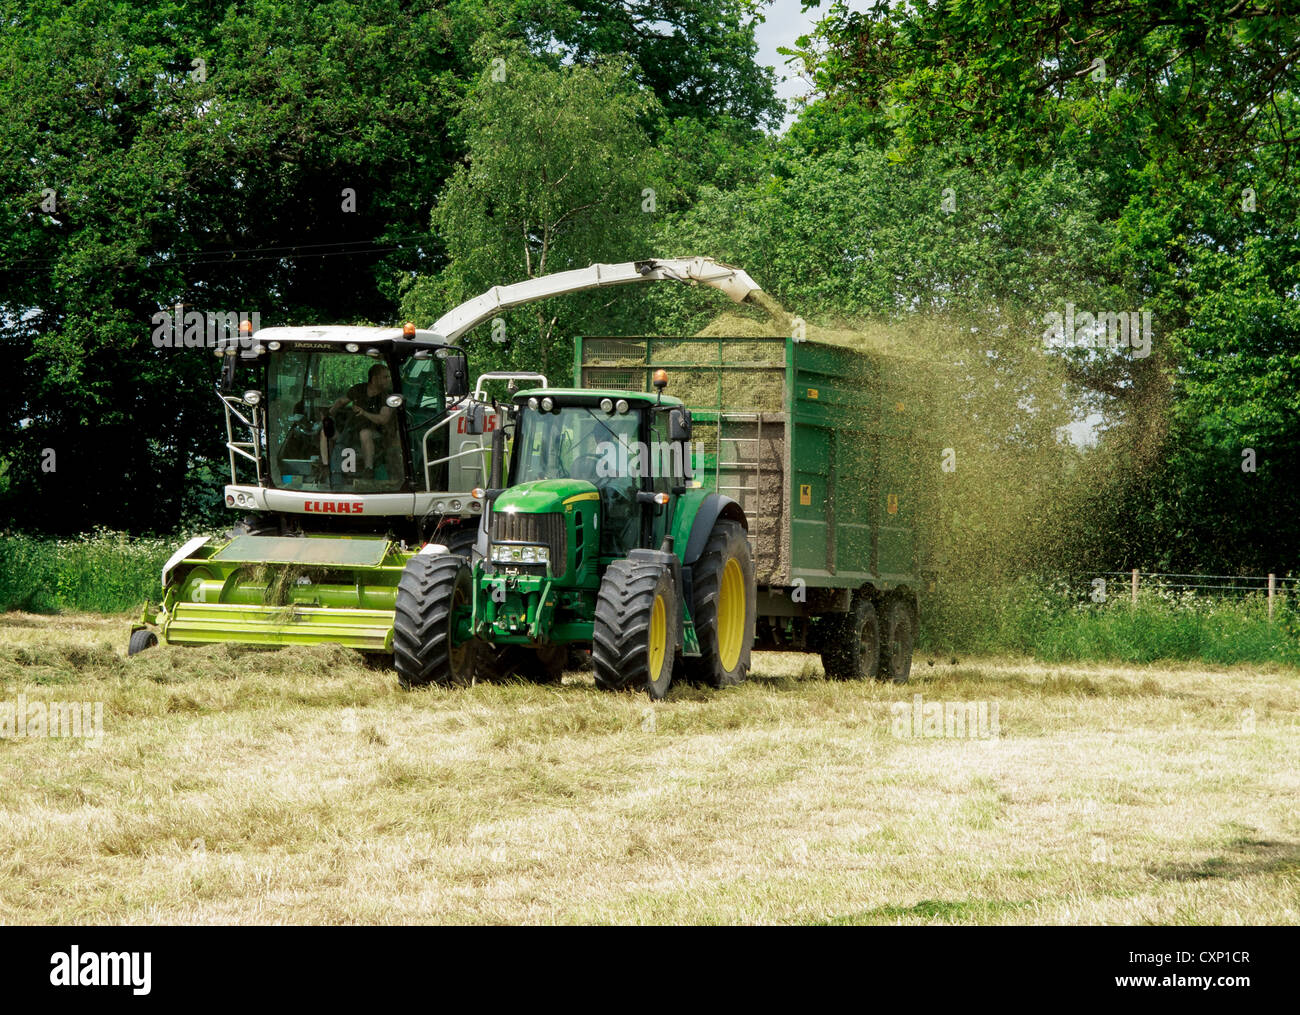 A Claas jaguar Forage harvester, picking up the grass and putting in a trailer for it to be taken to the silage heap Stock Photo